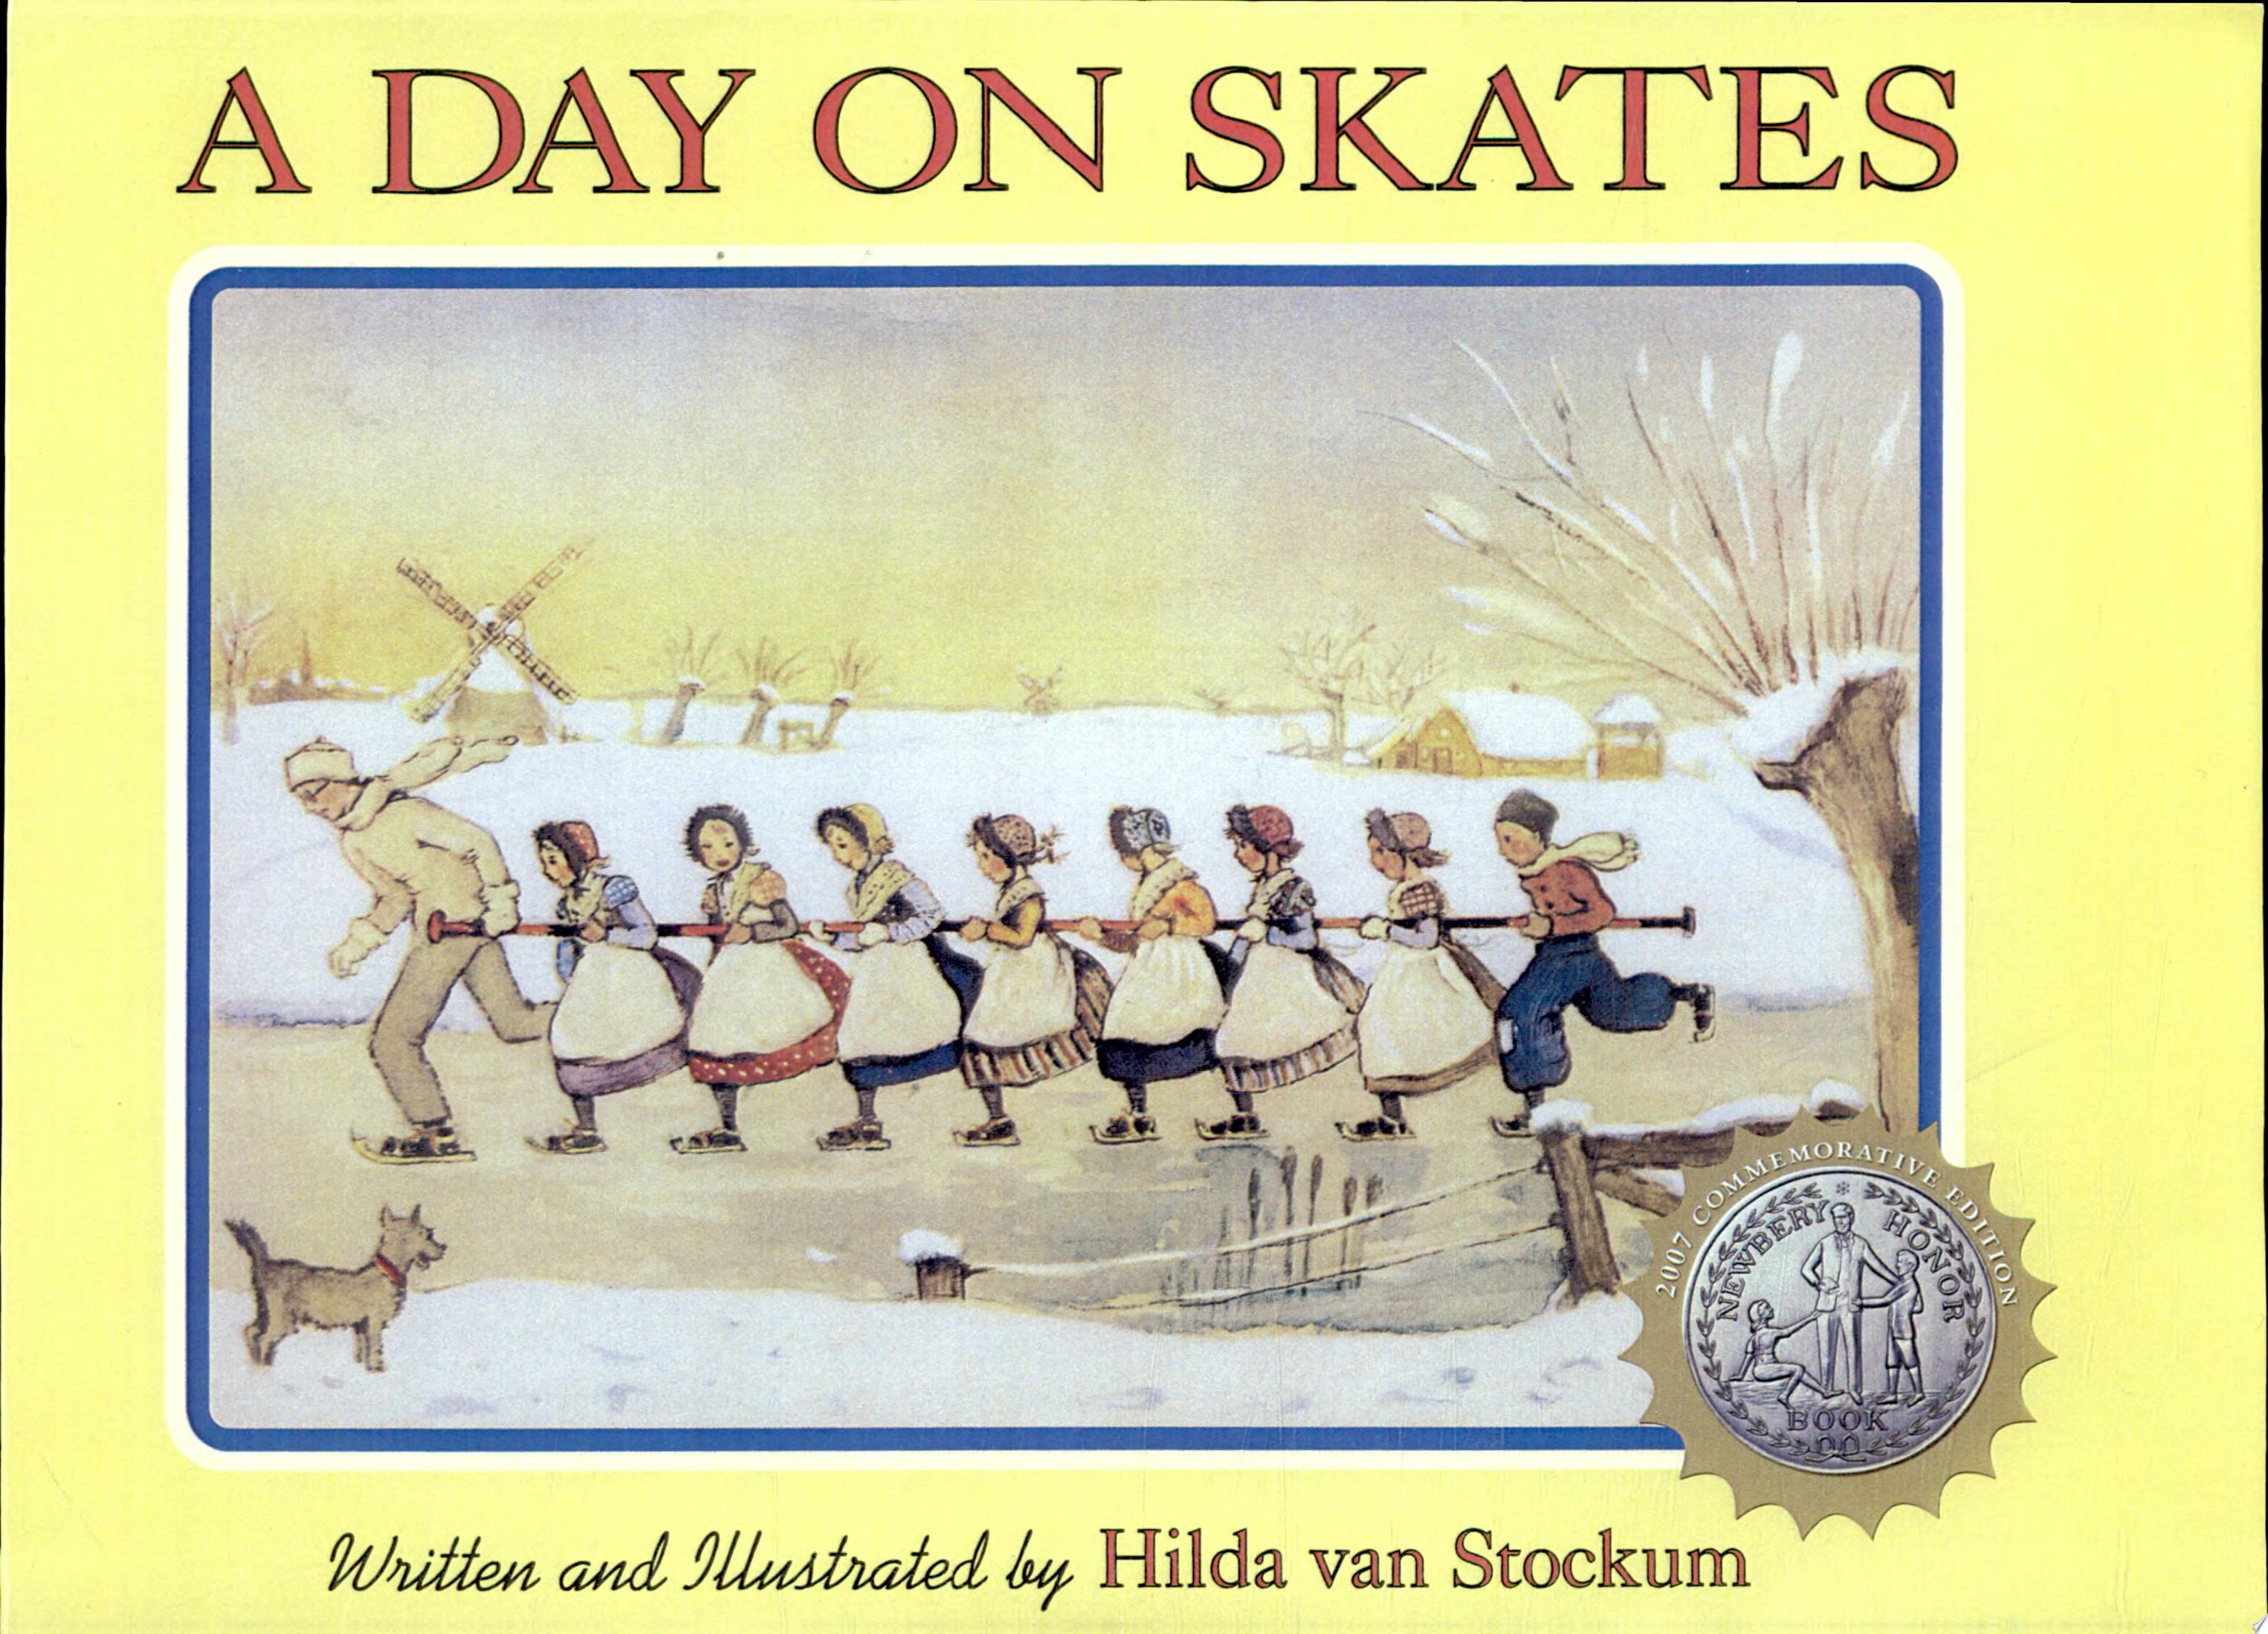 Image for "A Day on Skates"